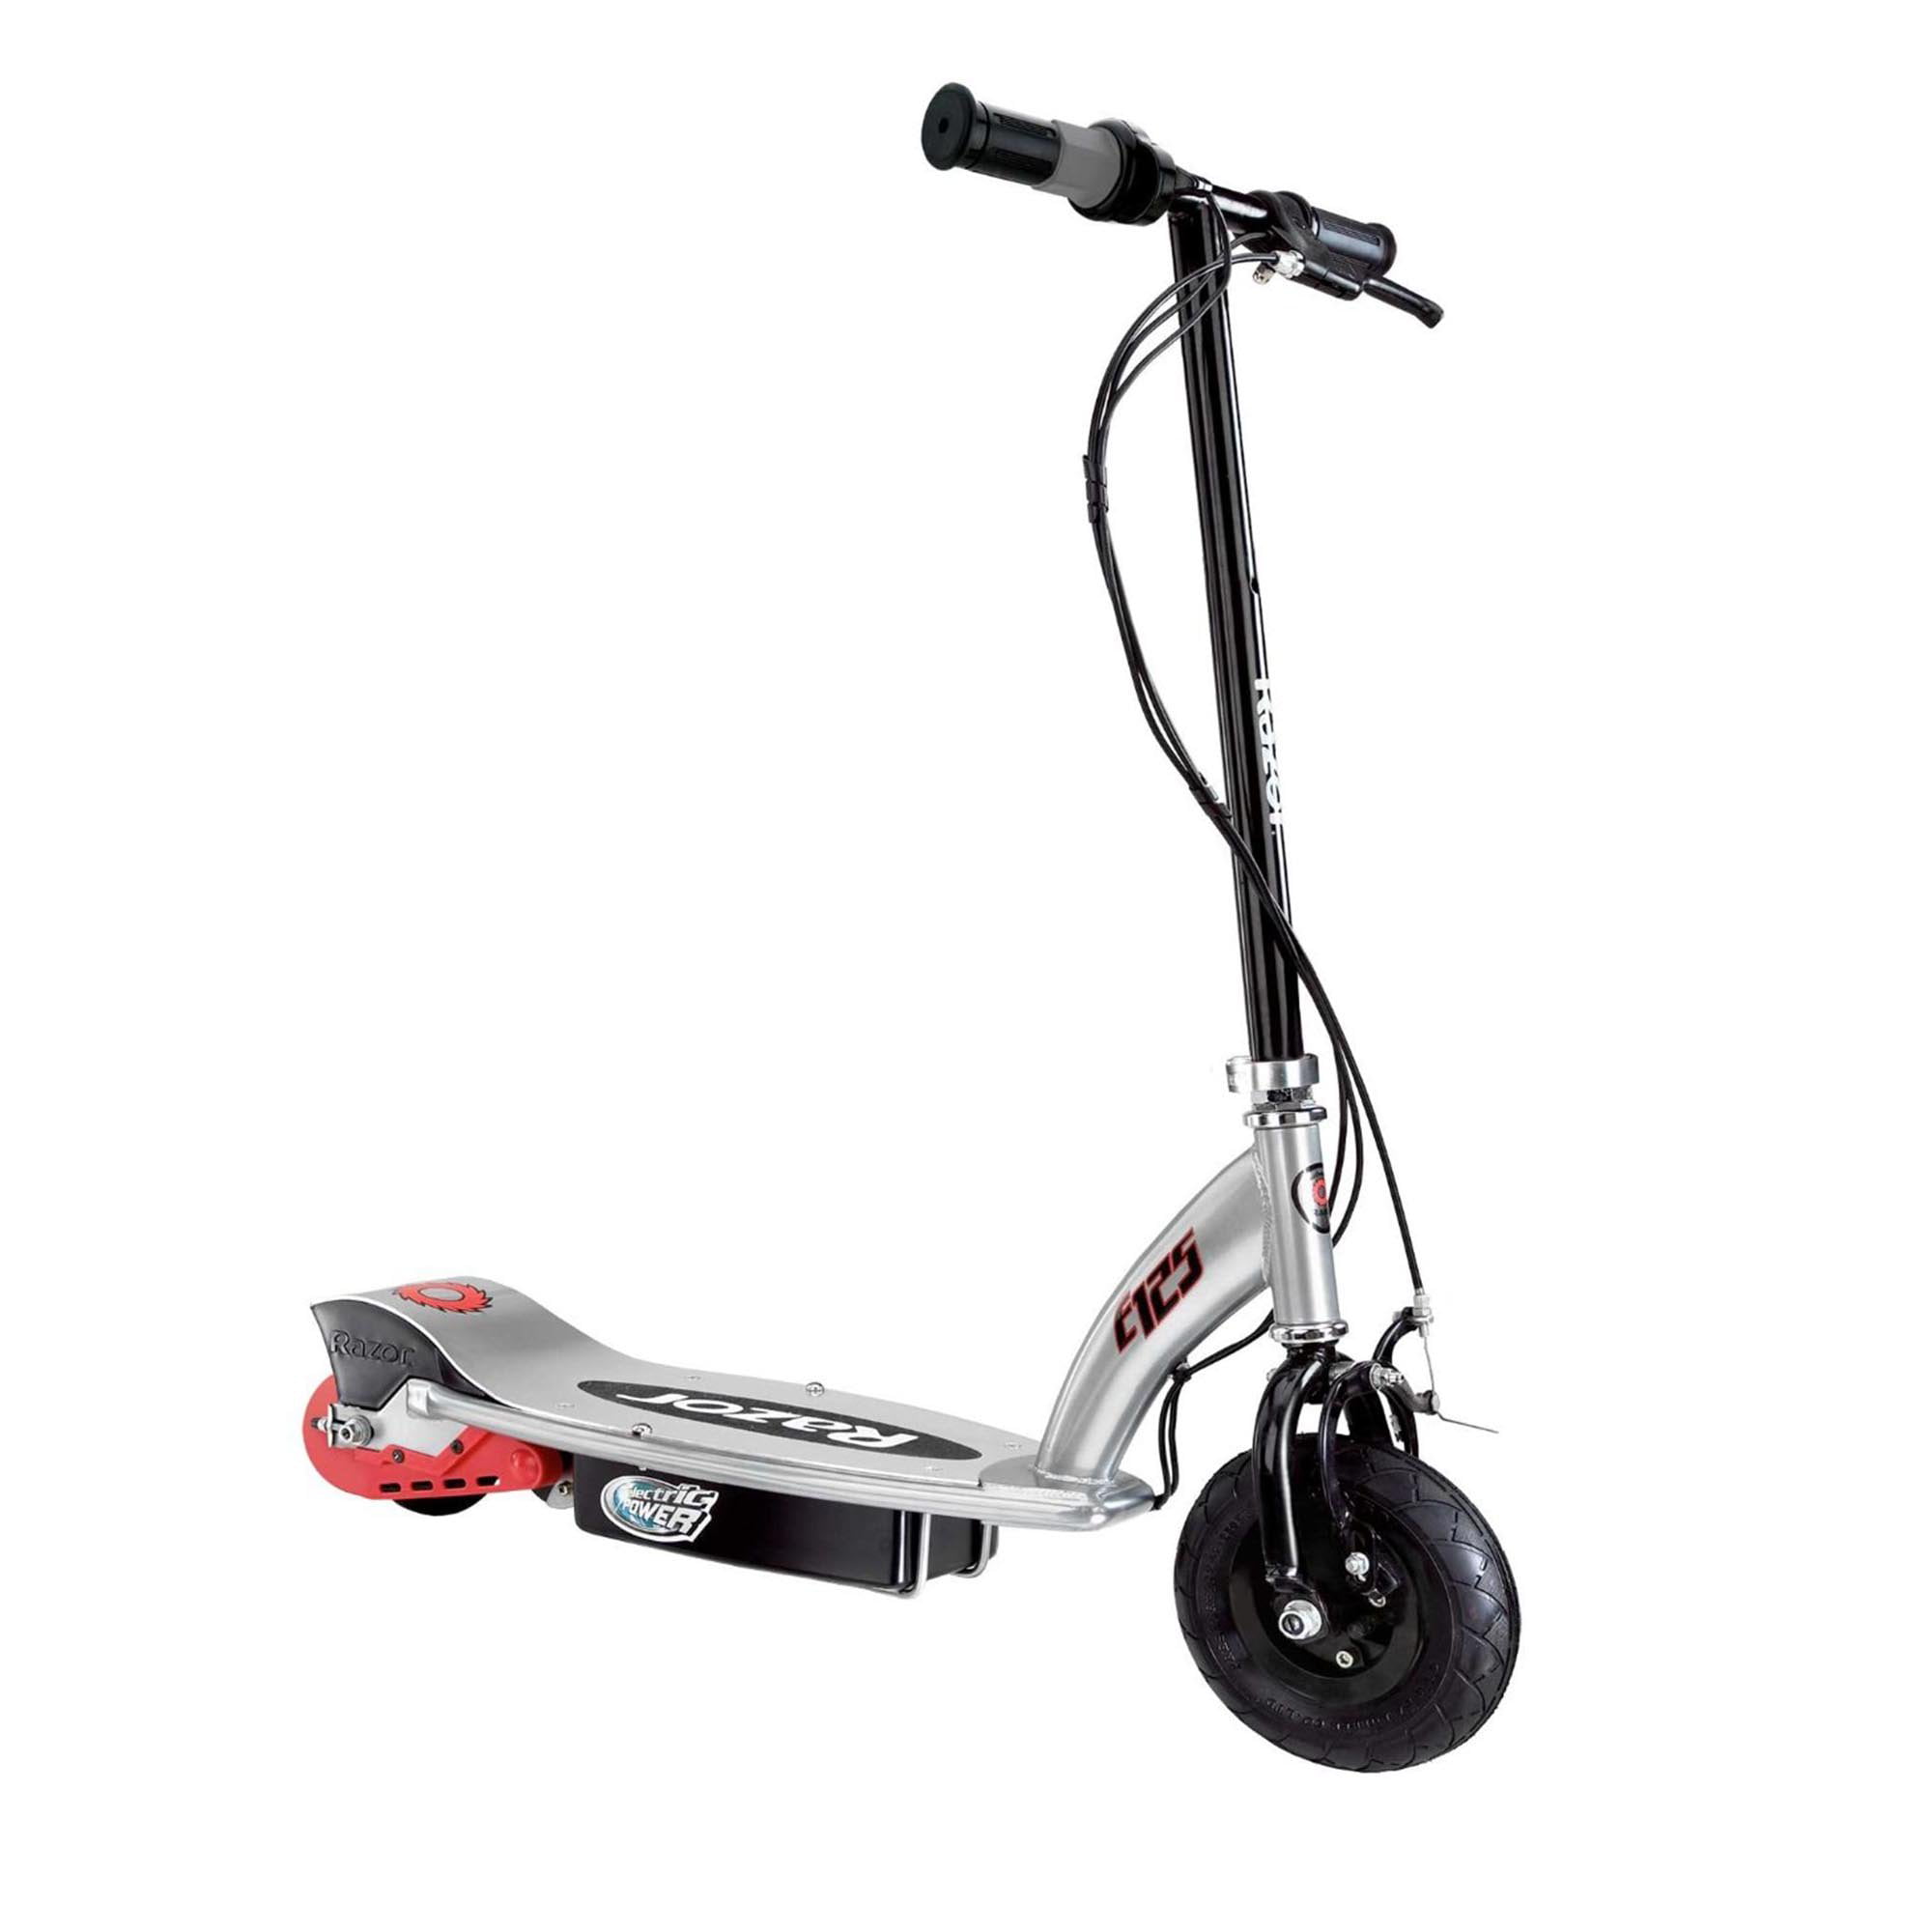 children's electric motor scooter